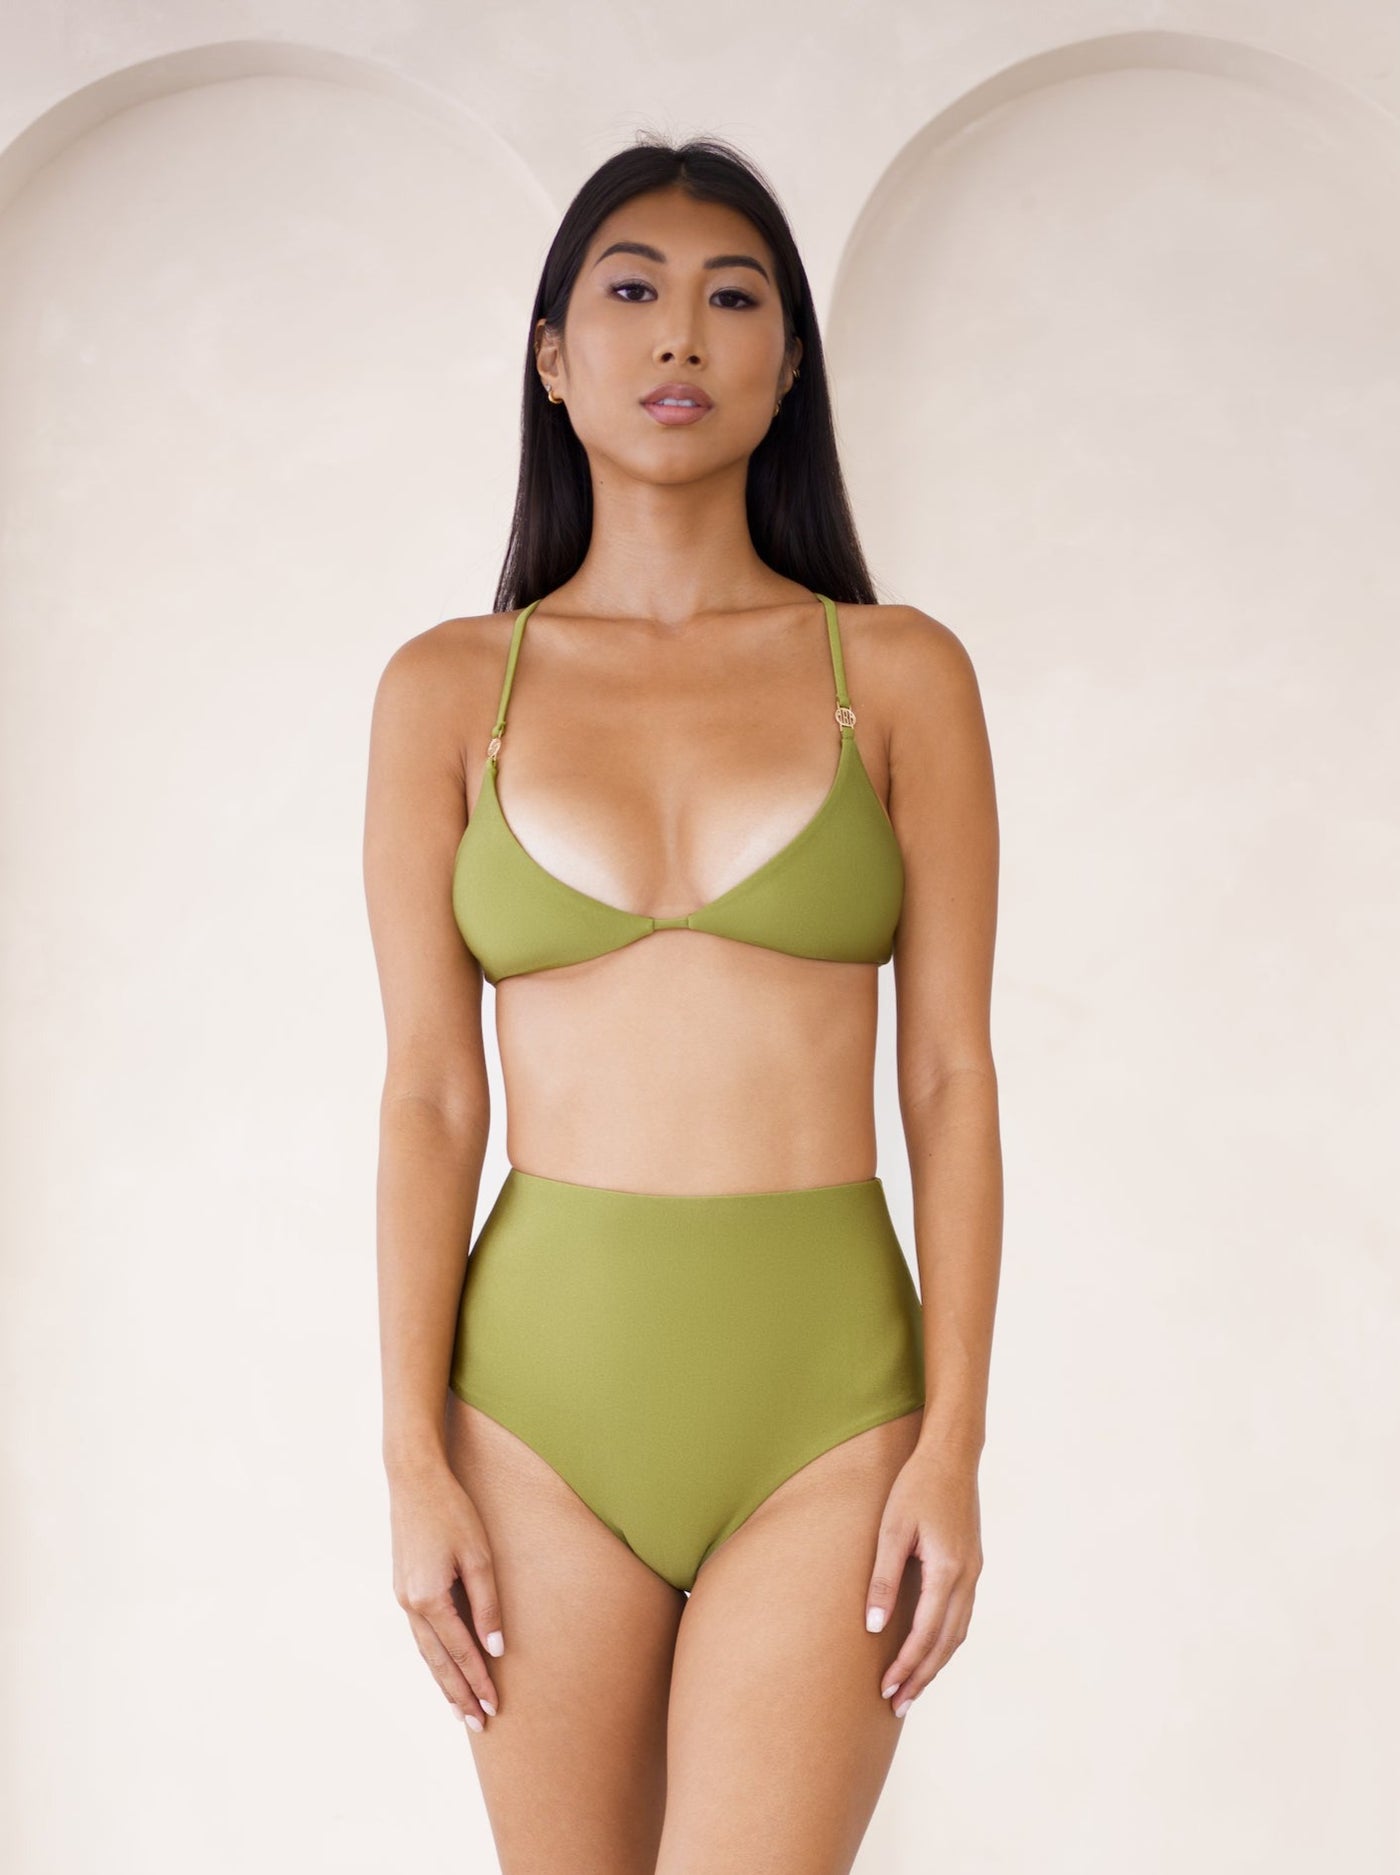 MBM Swim by Marcia B Maxwell model wearing Olive Green Bikini Charm top and Destiny bottoms #color_olive